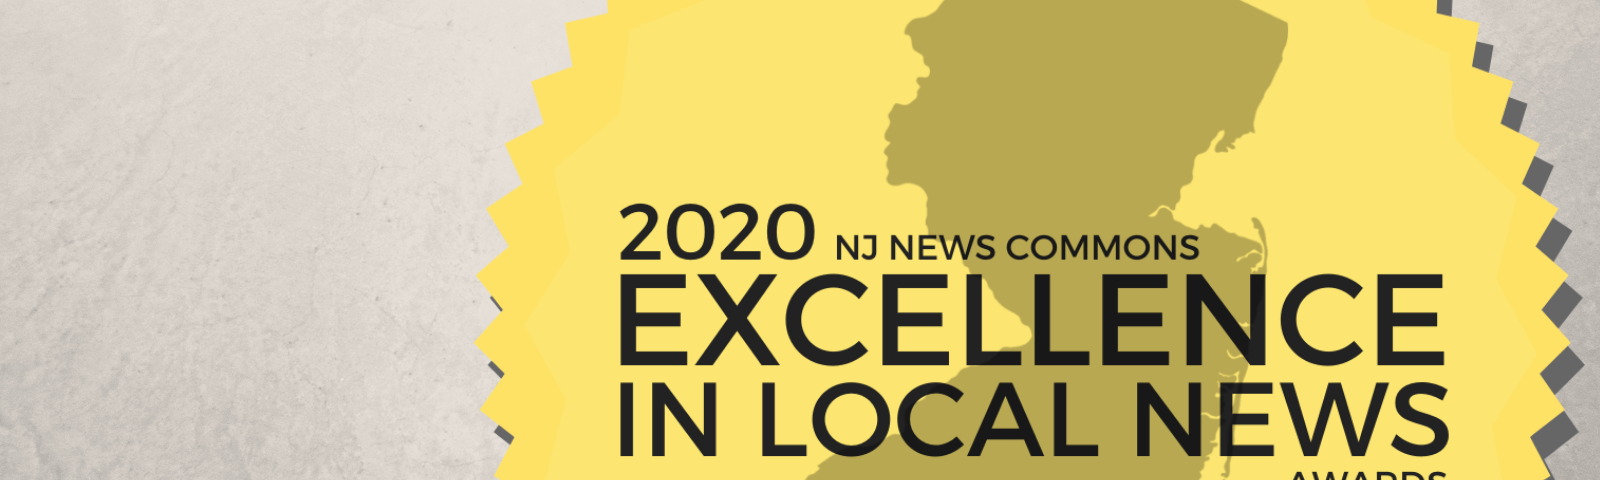 A featured imaged showing the 2020 Excellence in Local News Awards badge and logo.